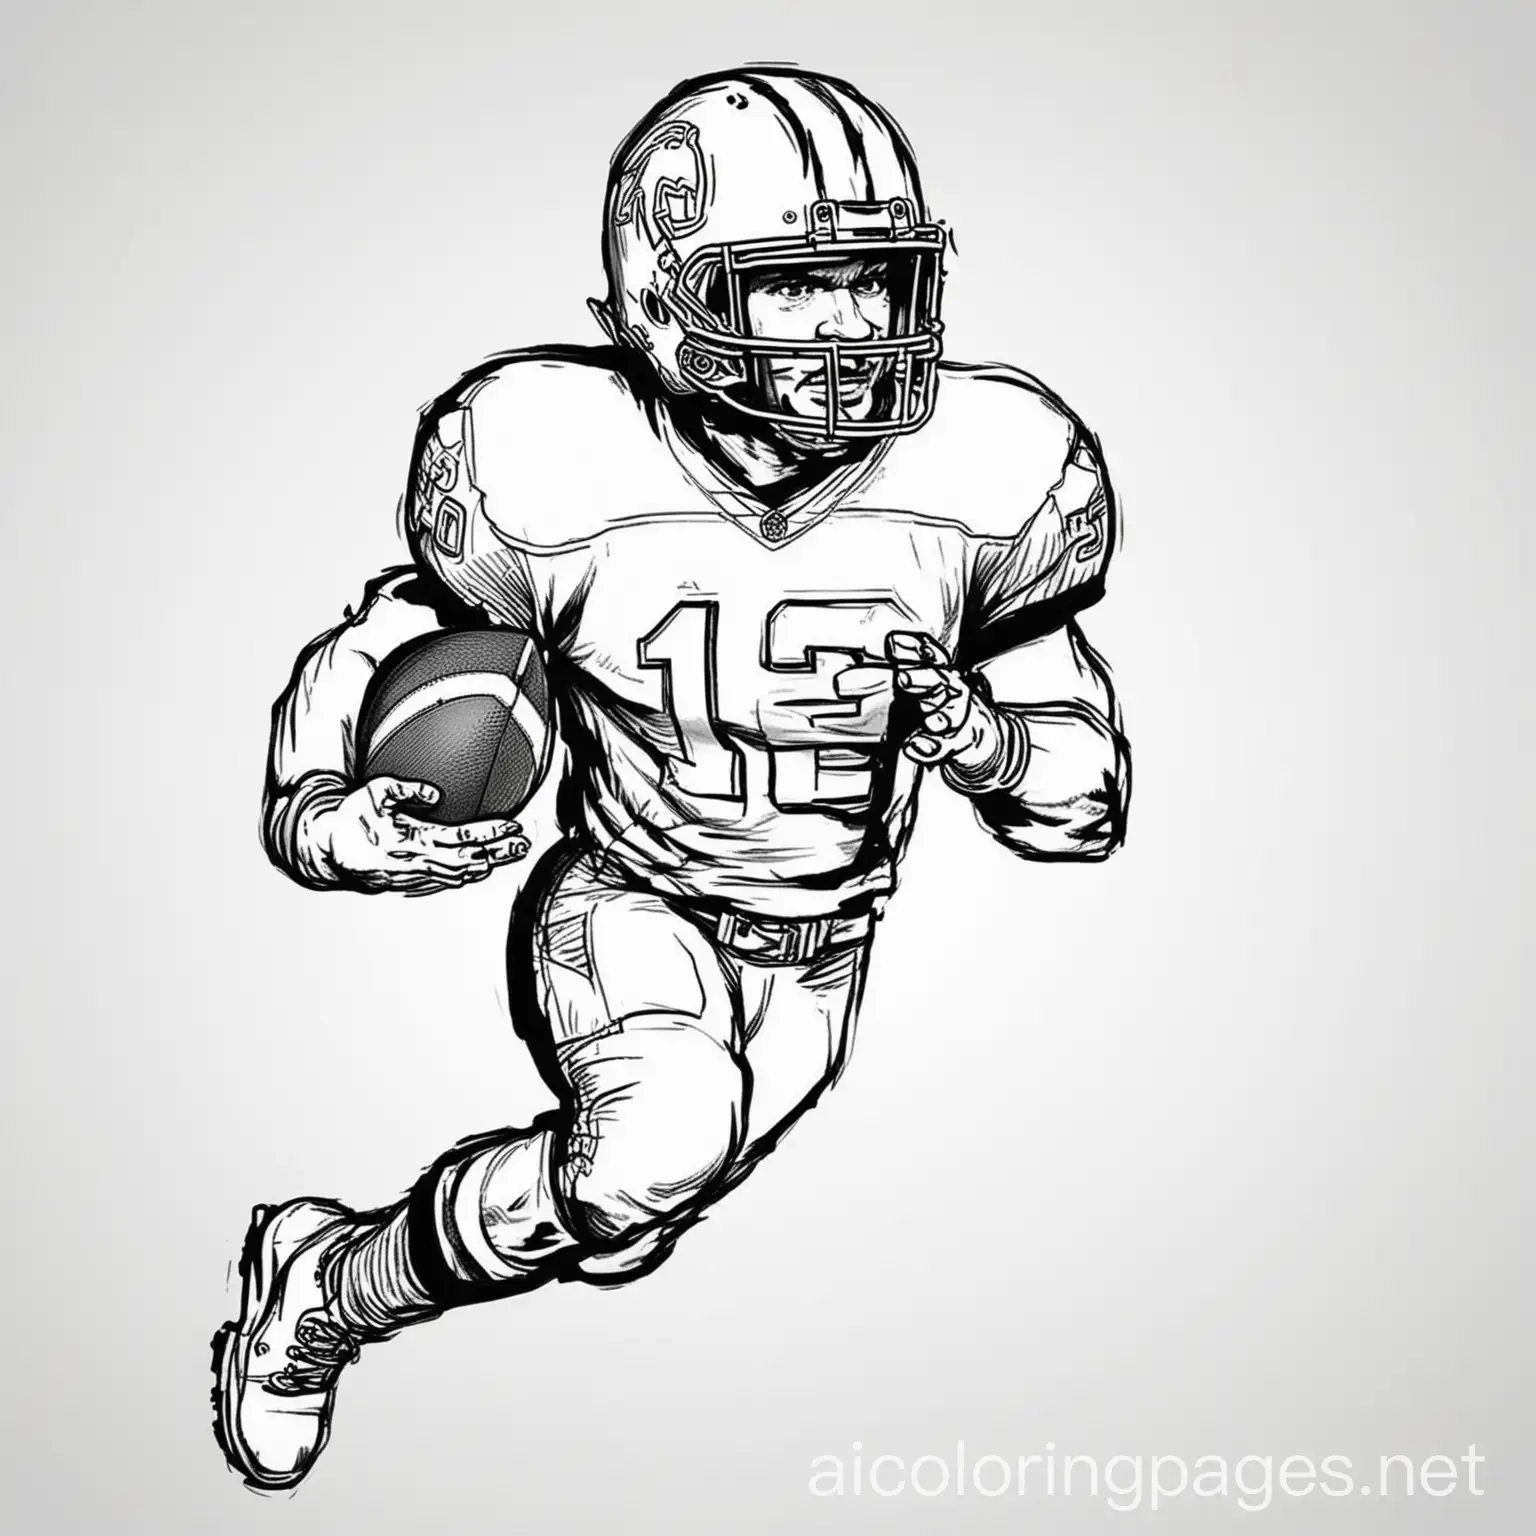 American Football Running Back coloring page for kids , Coloring Page, black and white, line art, white background, Simplicity, Ample White Space. The background of the coloring page is plain white to make it easy for young children to color within the lines. The outlines of all the subjects are easy to distinguish, making it simple for kids to color without too much difficulty